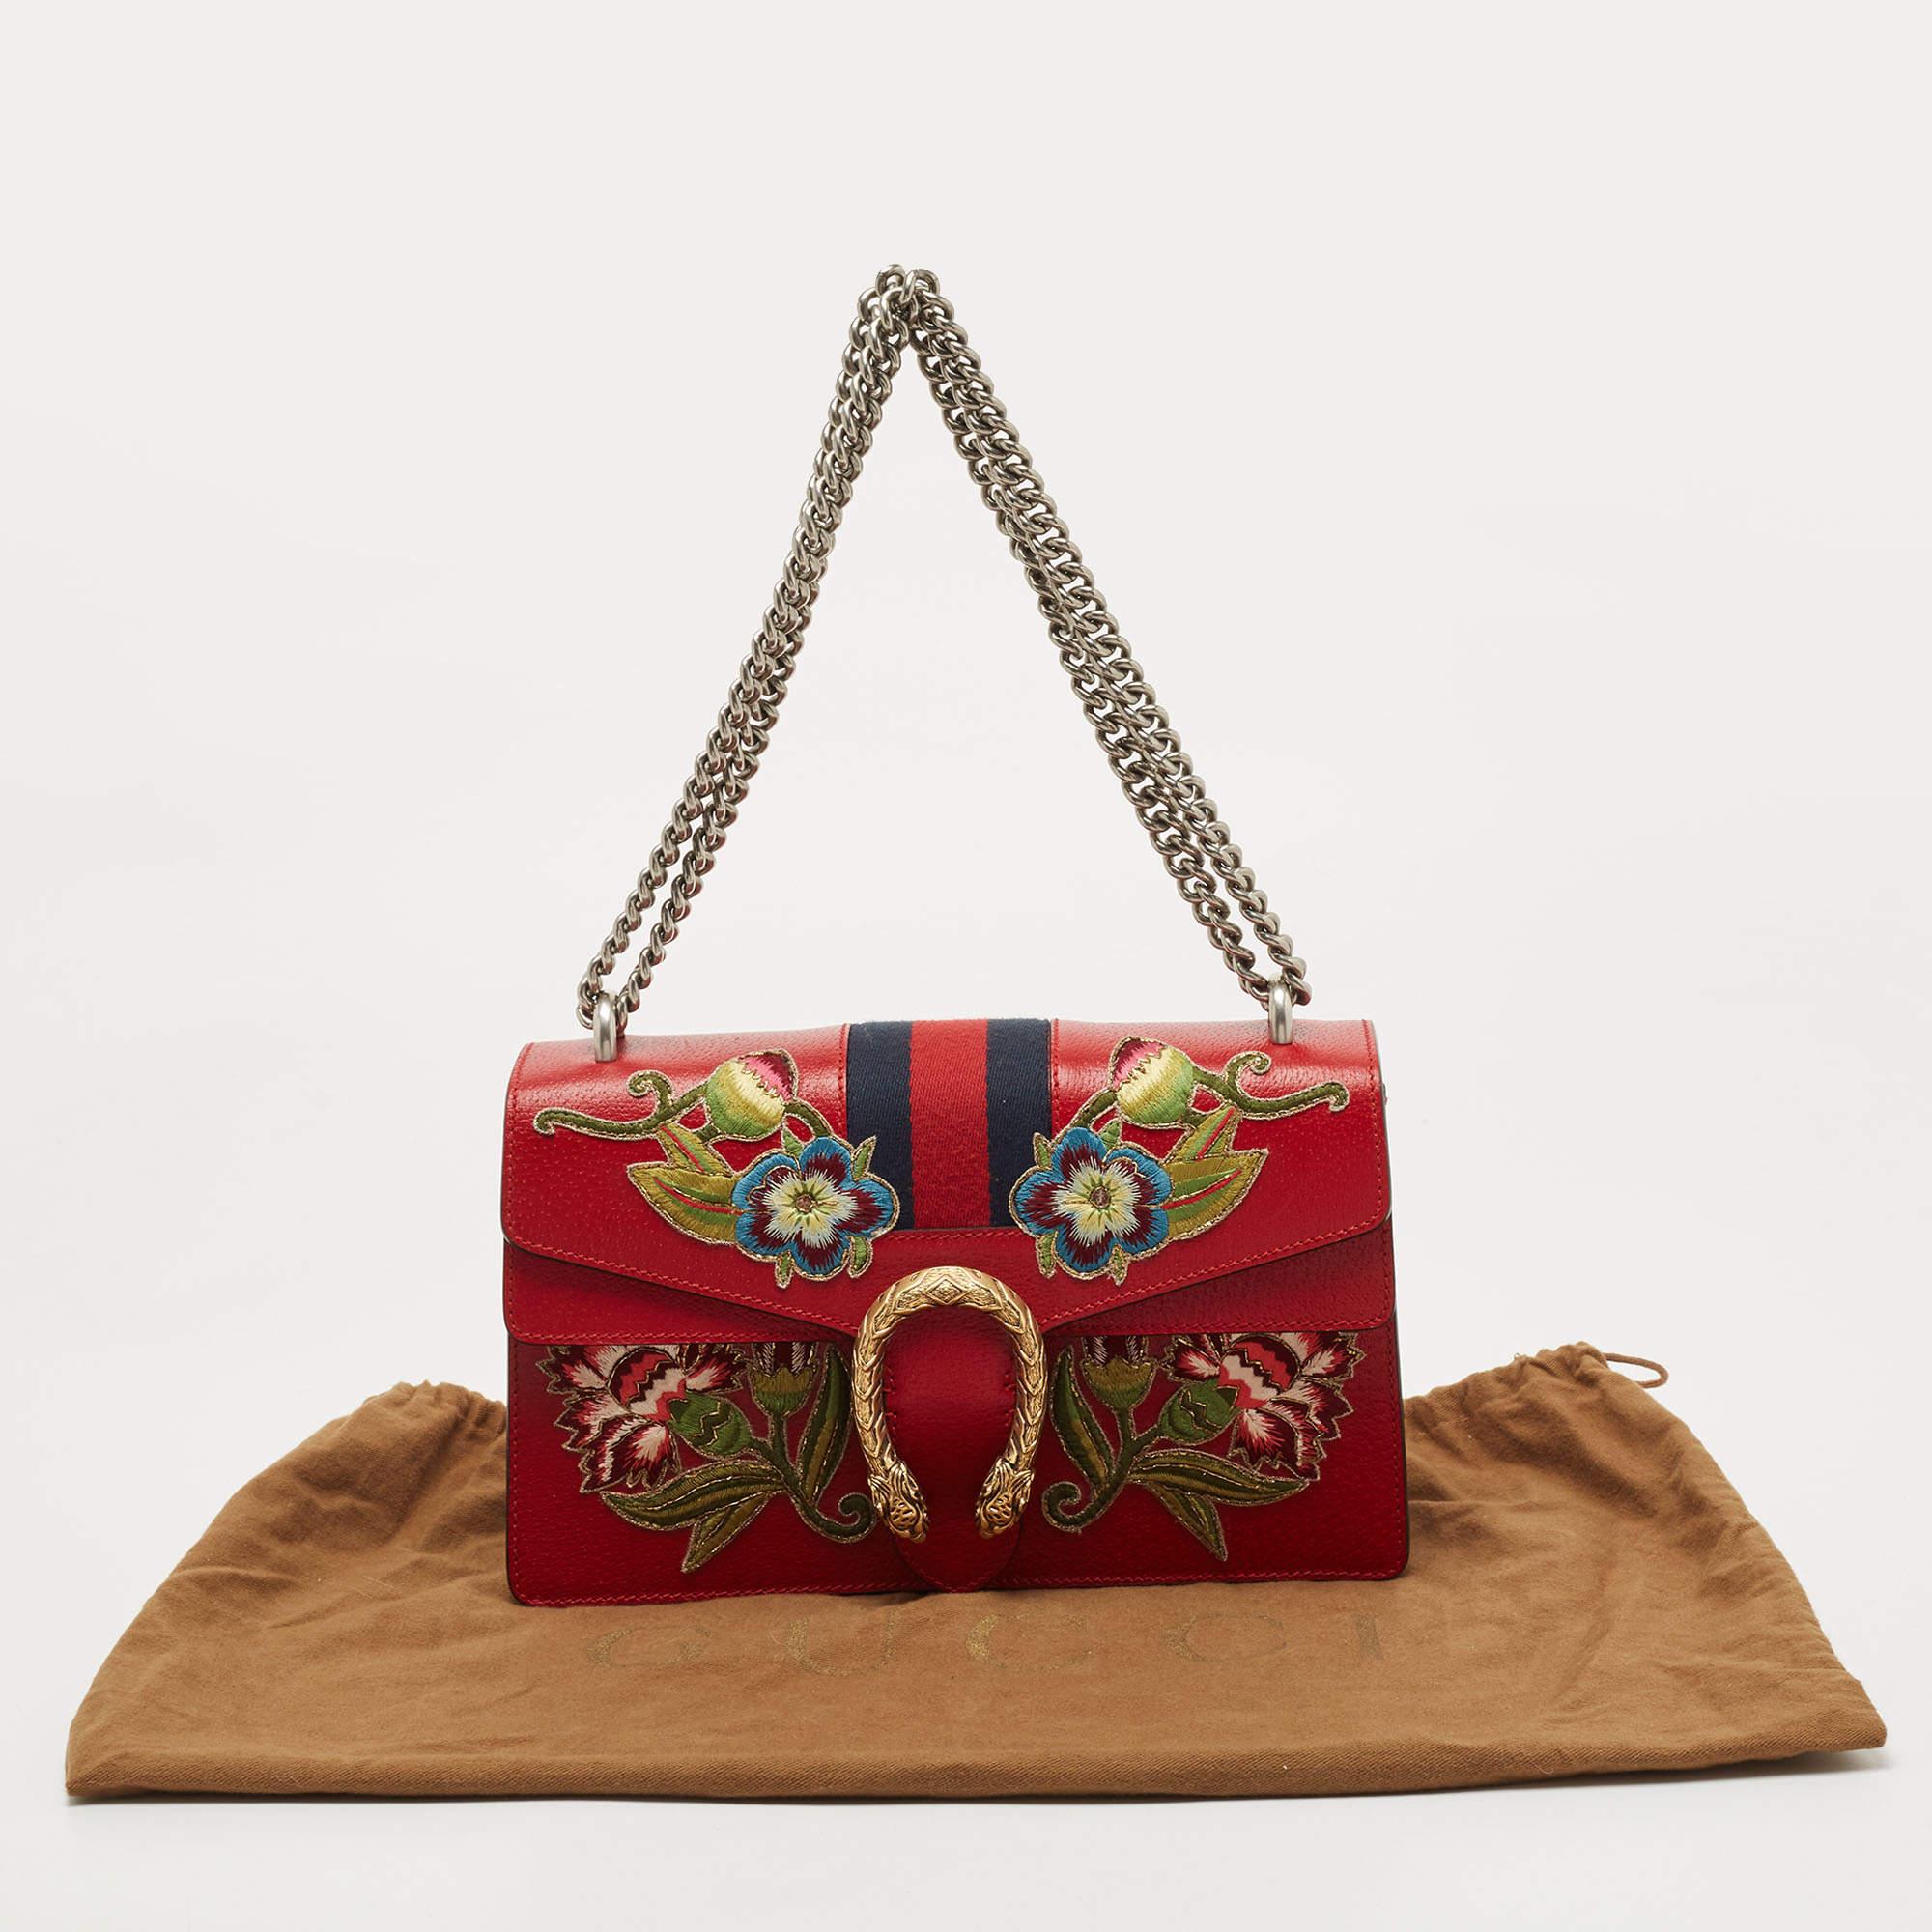 Gucci Red Floral Embroidered Leather Small Dionysus Shoulder Bag 2